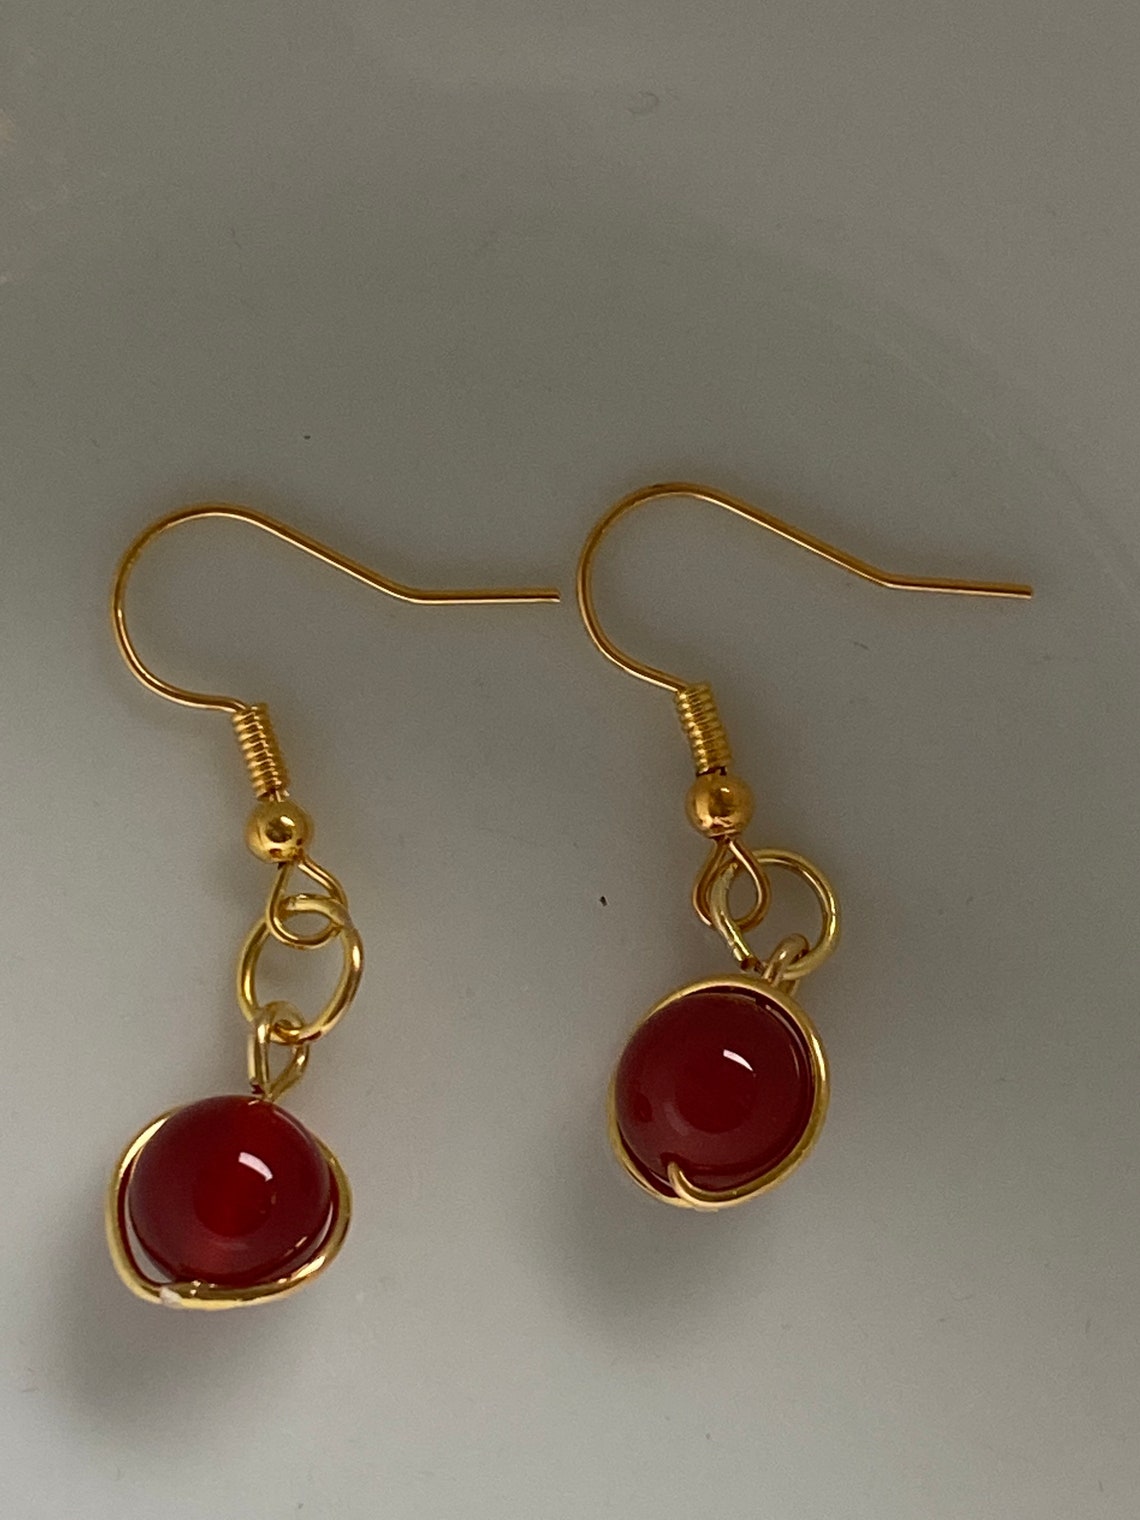 Red carnelian gemstone earrings. Gold and red earrings. Gold | Etsy